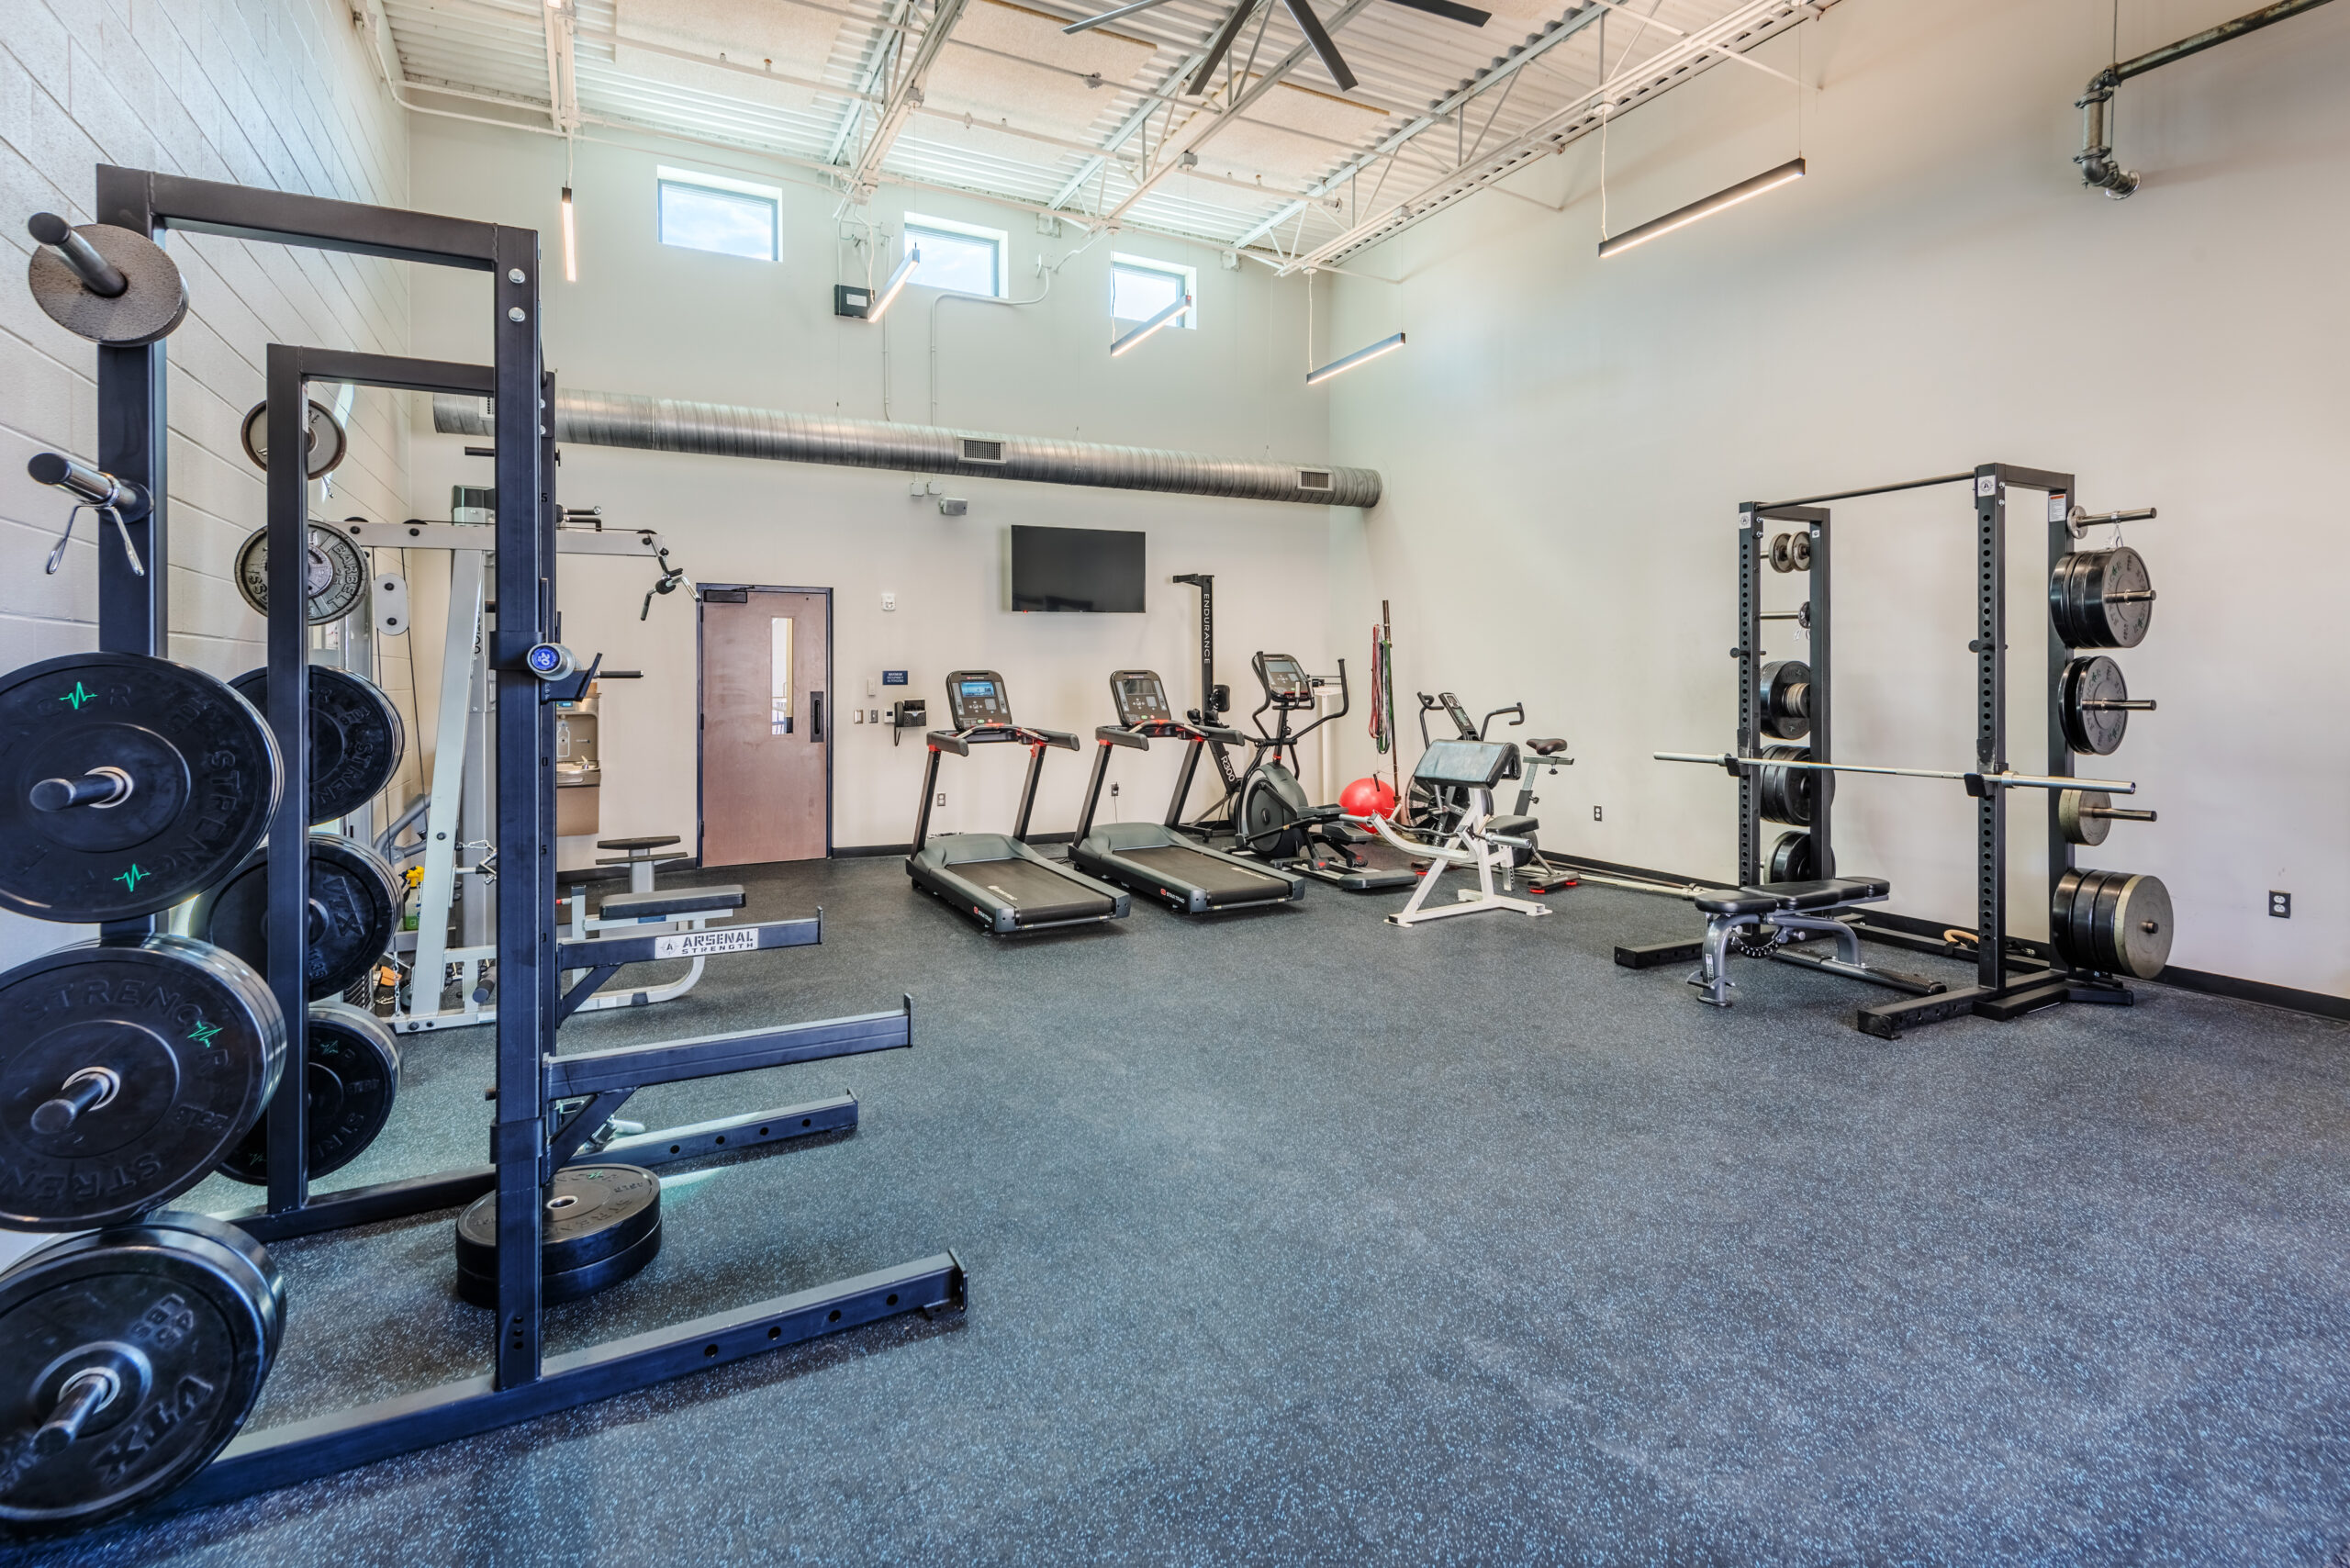 CMPD South Division Station Workout Room with Treadmills and Weights